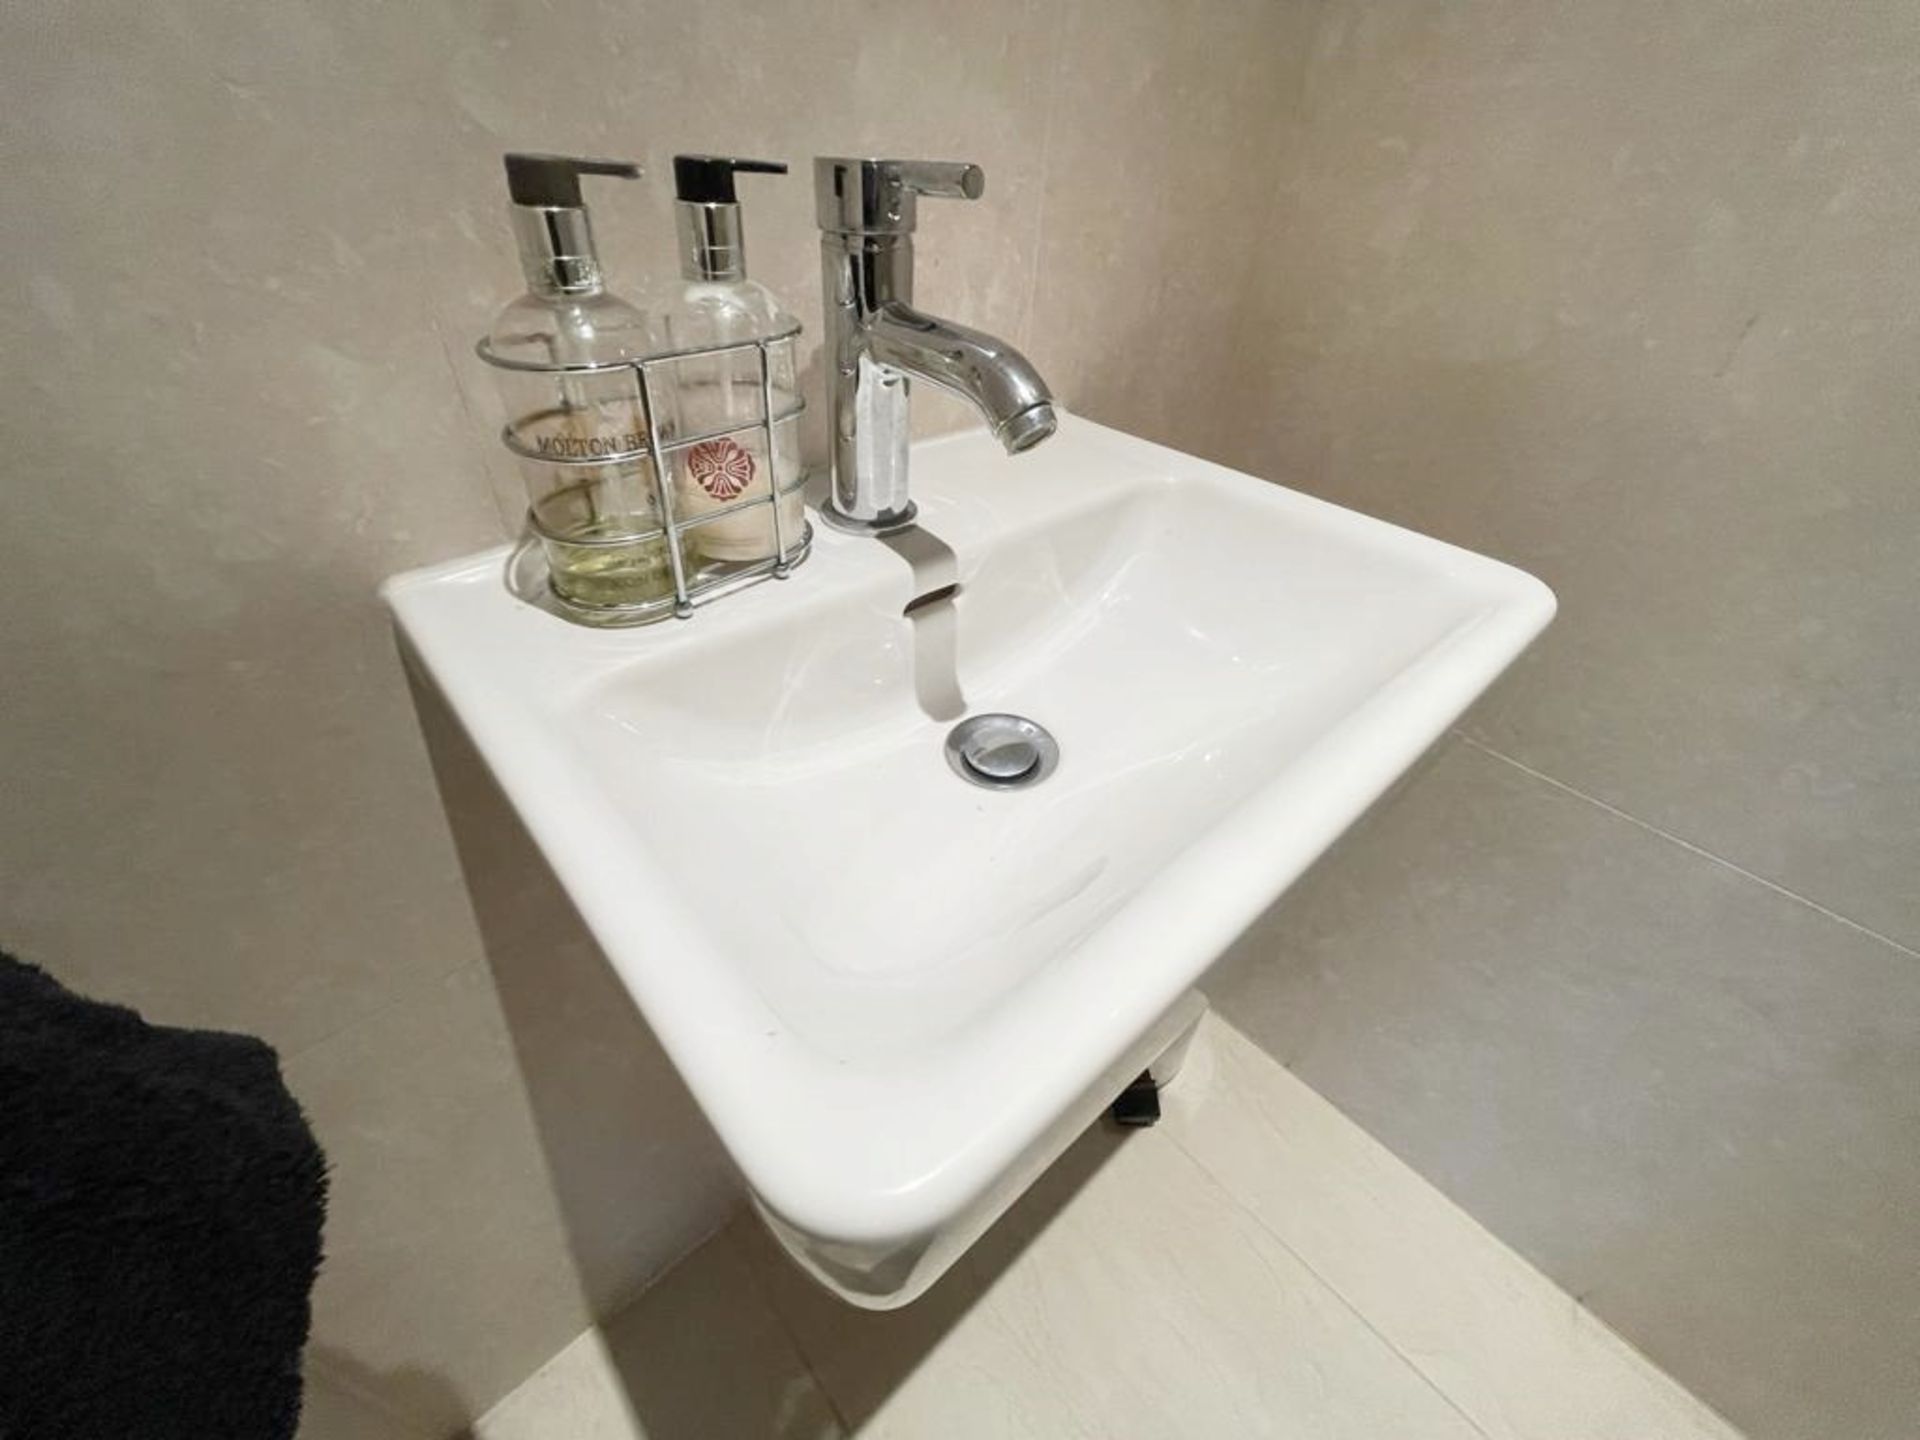 1 x LAUFEN PRO Toilet and Washbasin - NO VAT ON THE HAMMER - Preowned - CL631 - Location: Alderley - Image 4 of 7